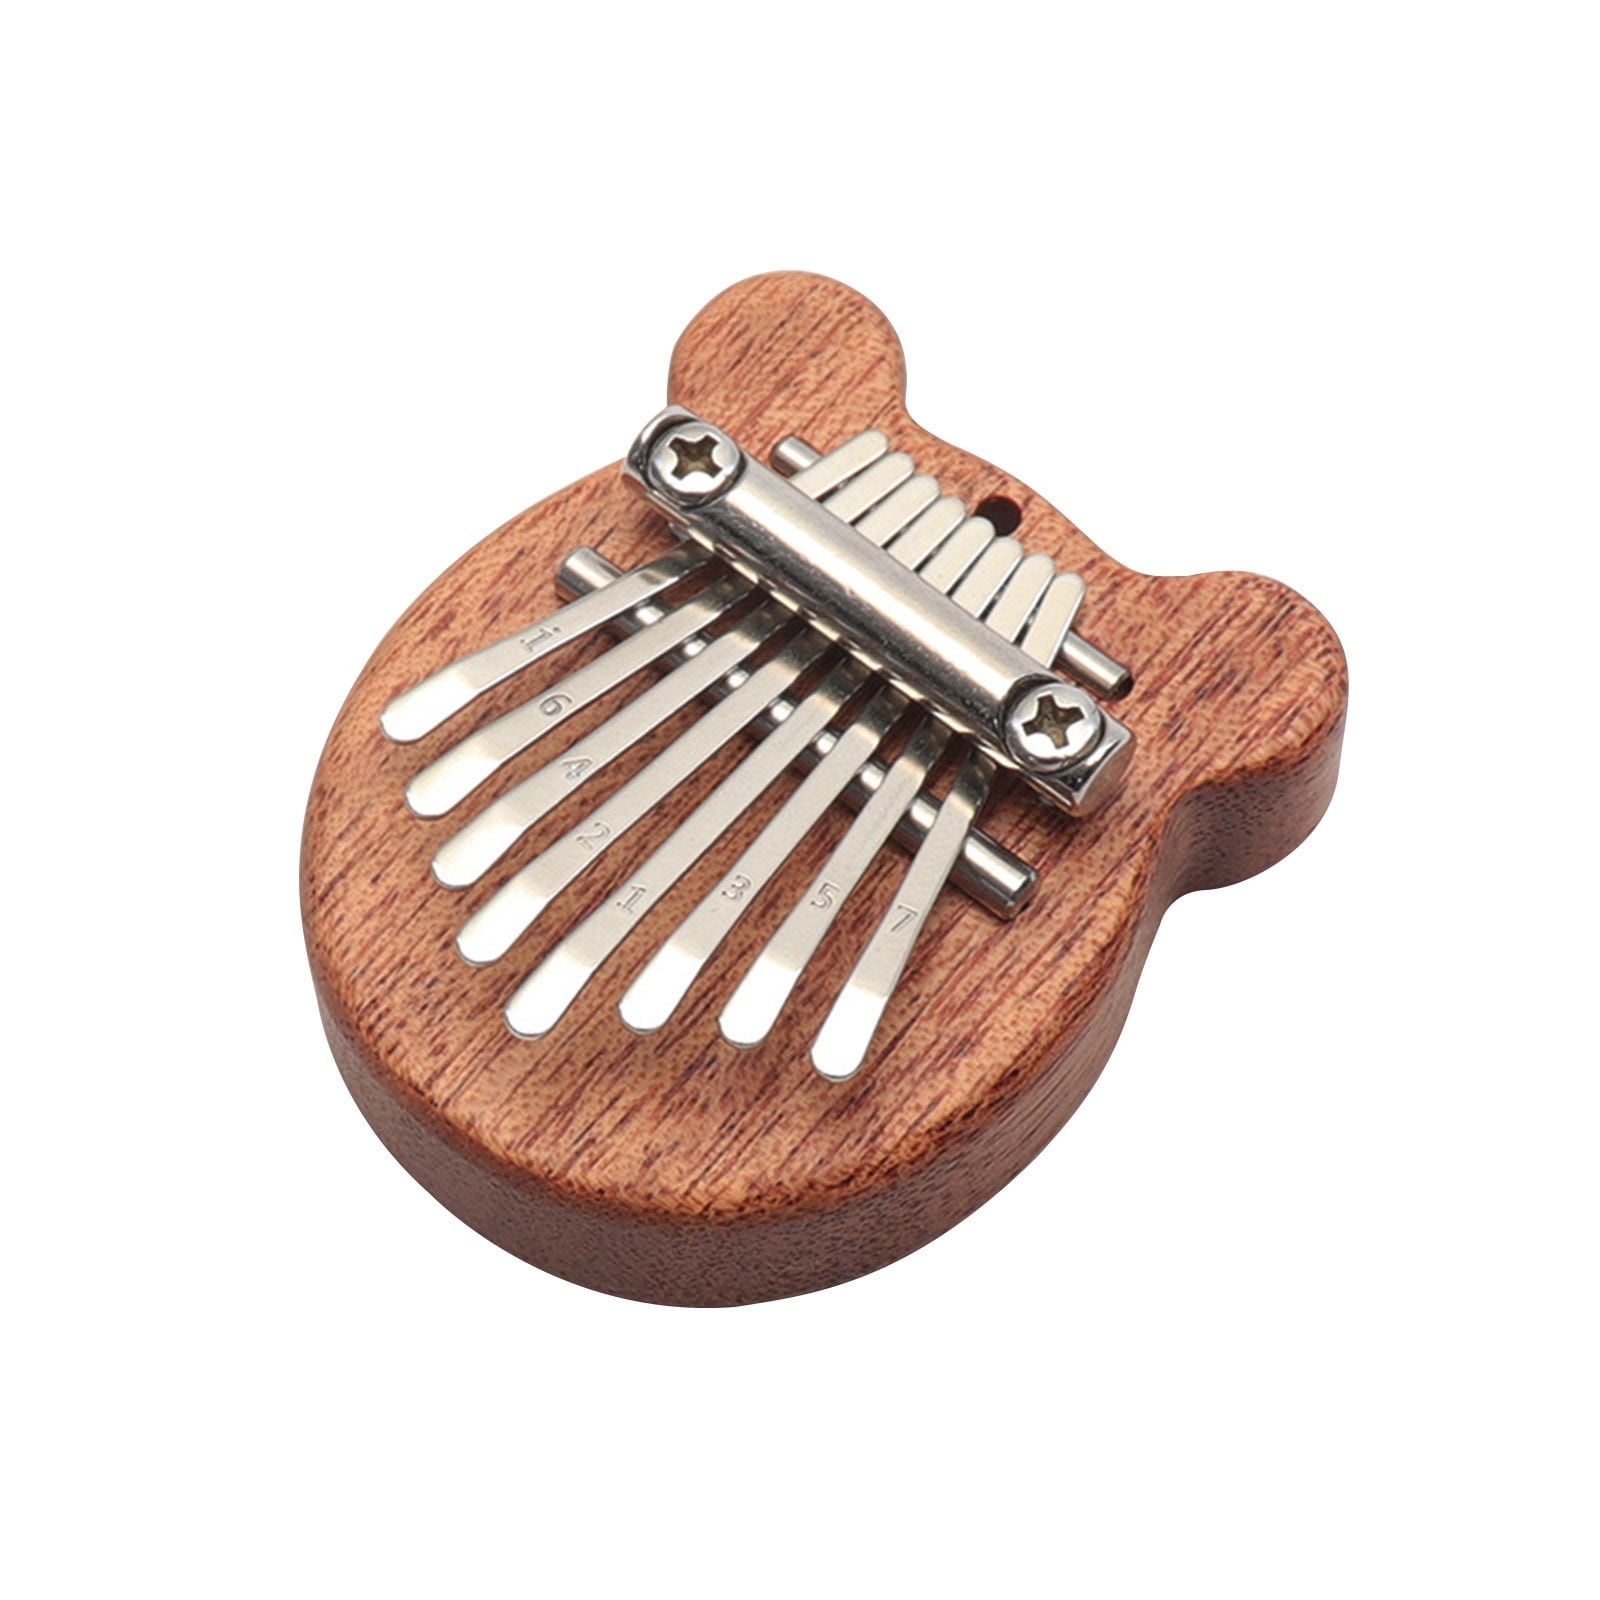 1 Piece Mini Marimbas Palm Size Marimbas Musical Instrument Finger Thumb Piano for Kids and Adults Beginners Music Learners Pendant Decoration